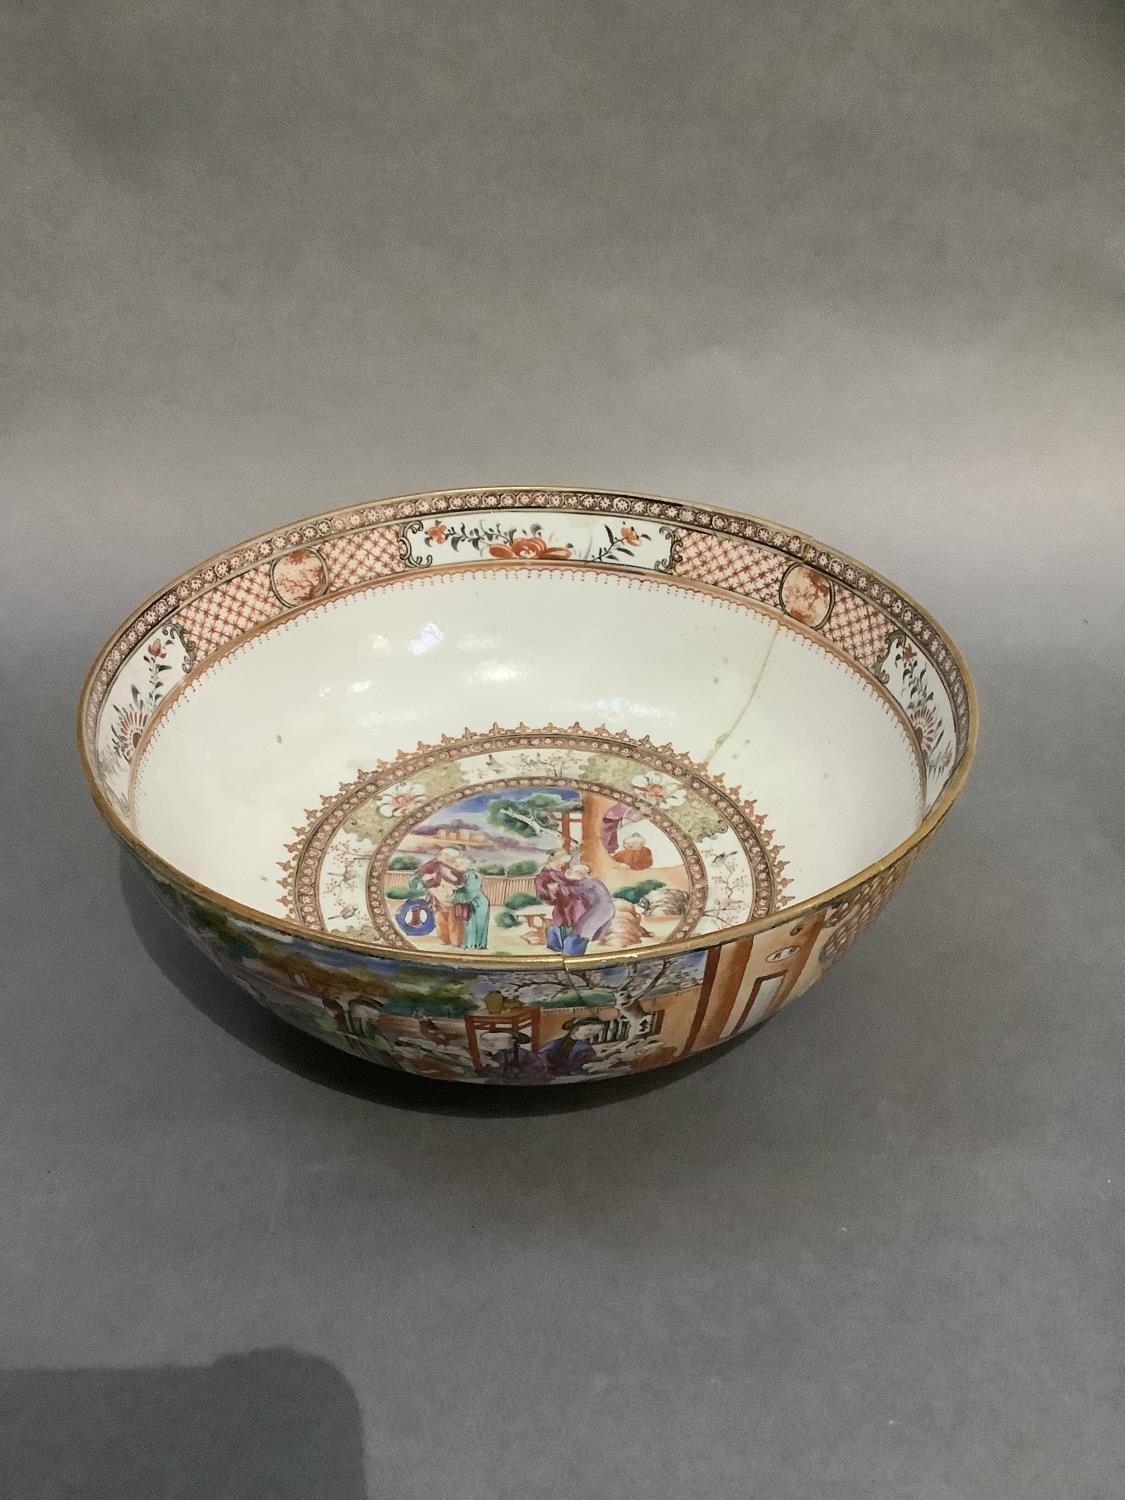 Late 18th/early 19th century Chinese familel rose punch bowl, the exterior painted with two large